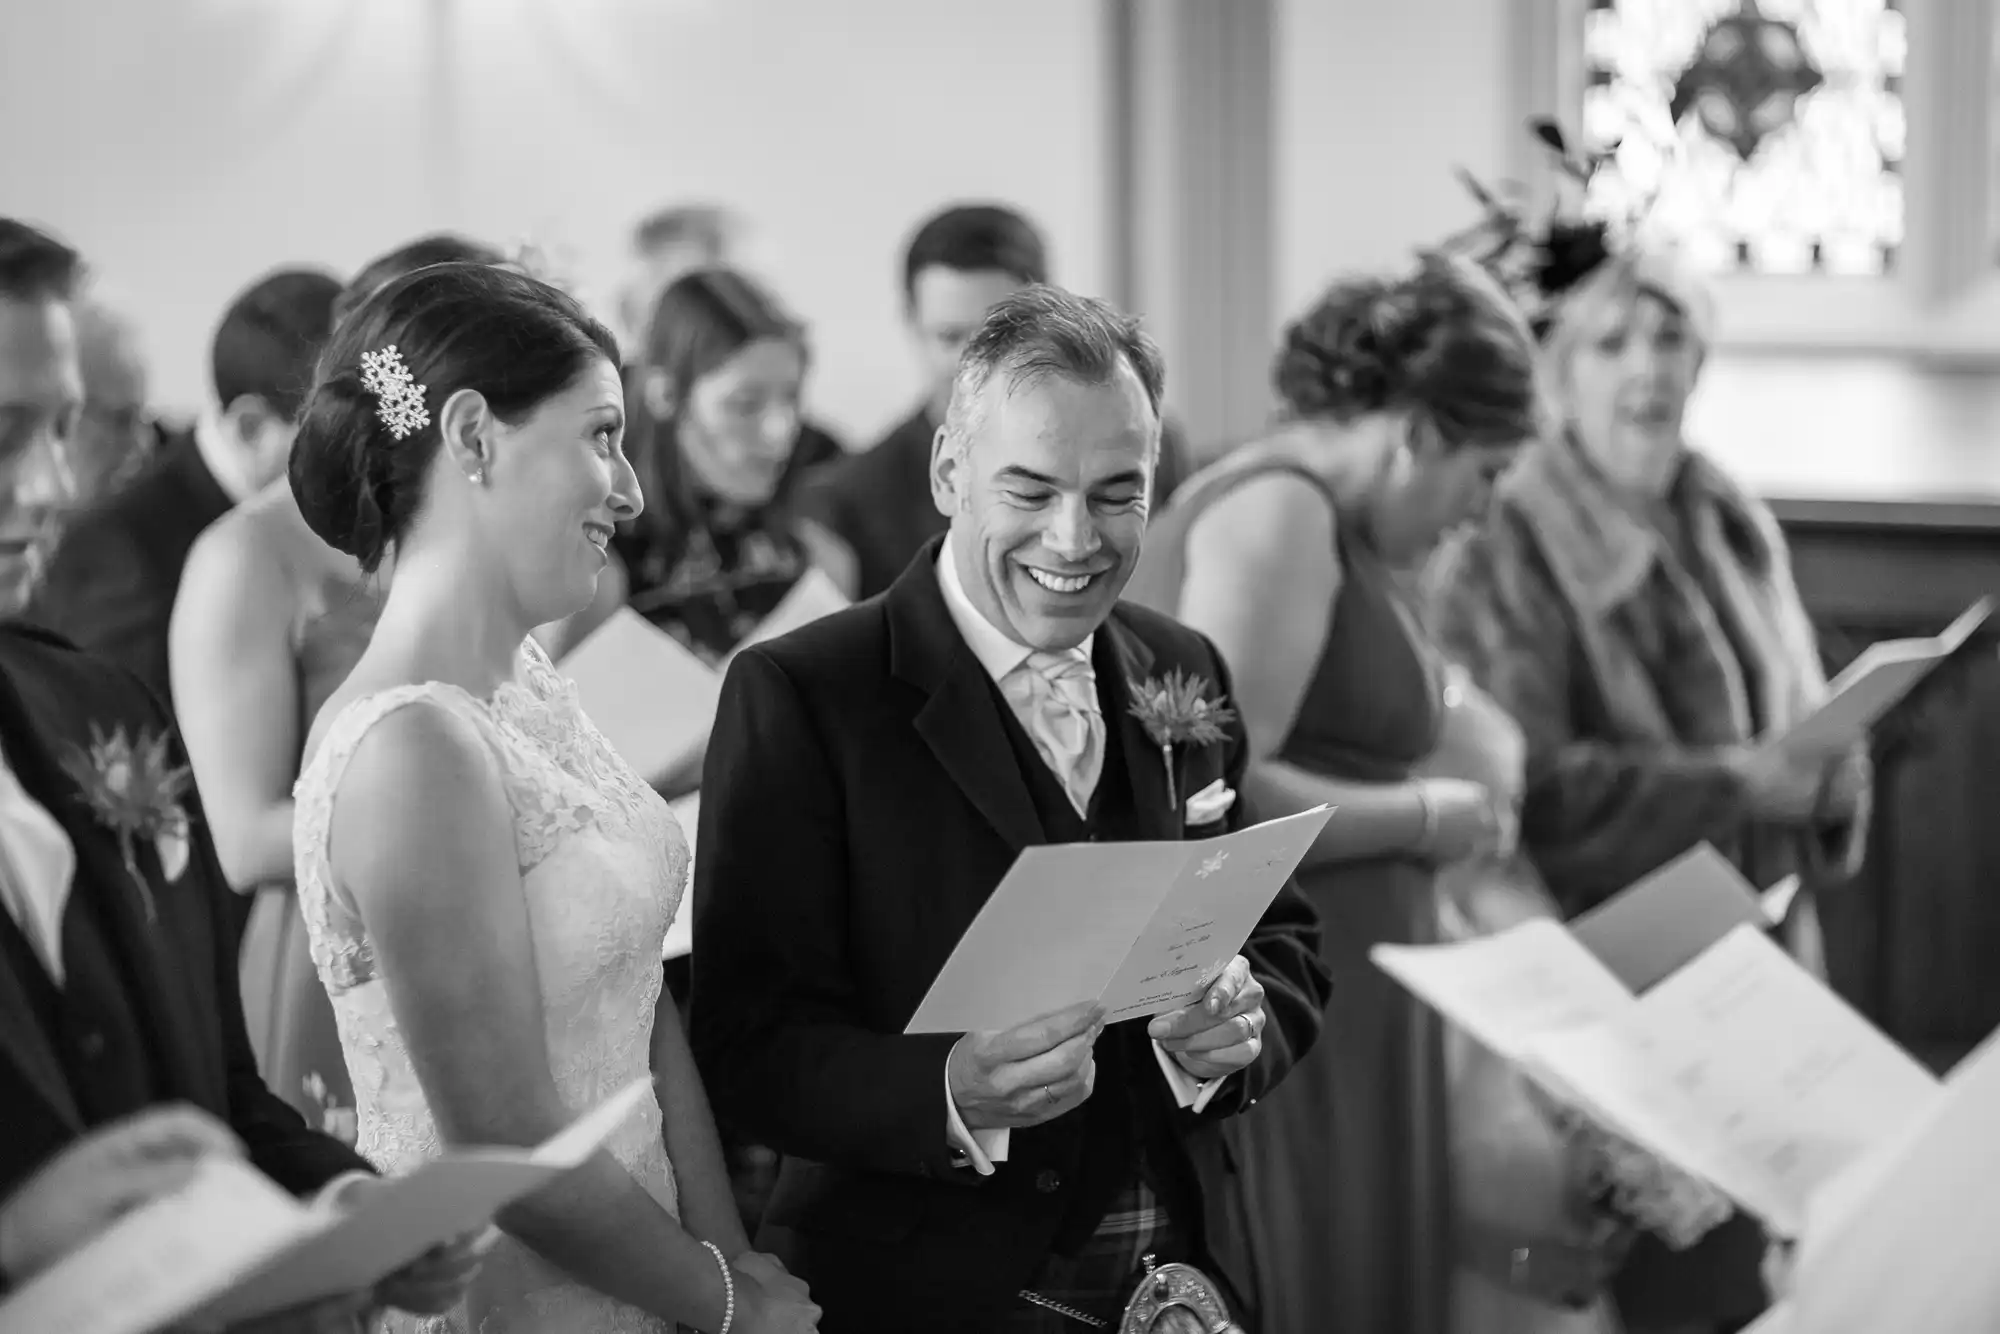 A bride and groom smiling and looking at a document during their wedding ceremony, surrounded by guests in a black and white photo.